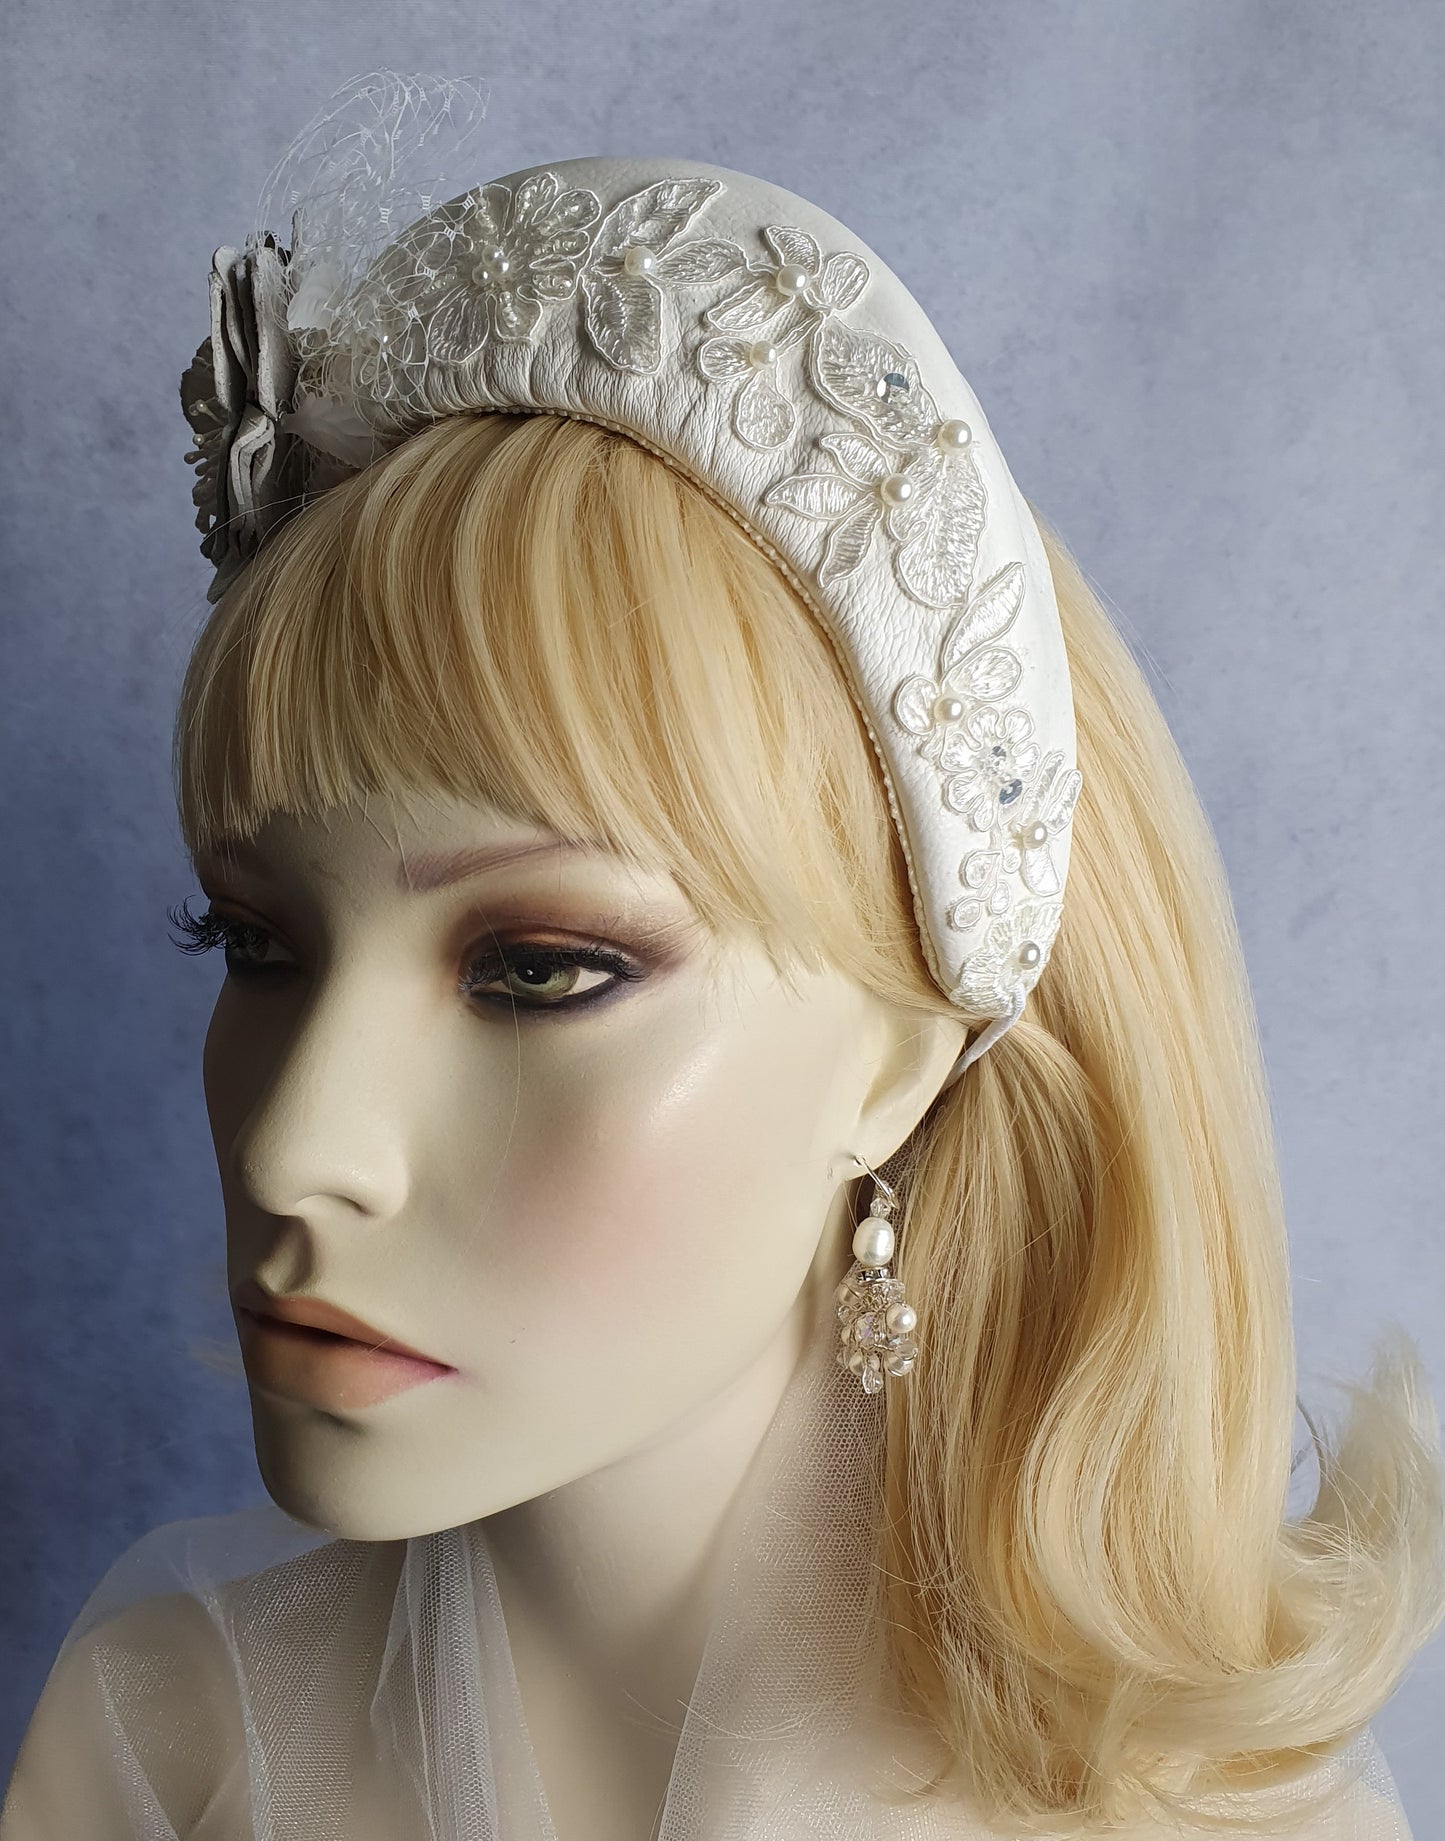 Handmade white Headband made of natural leather - for a special occasion. Fascinator, Tiara, Hairband, Headband